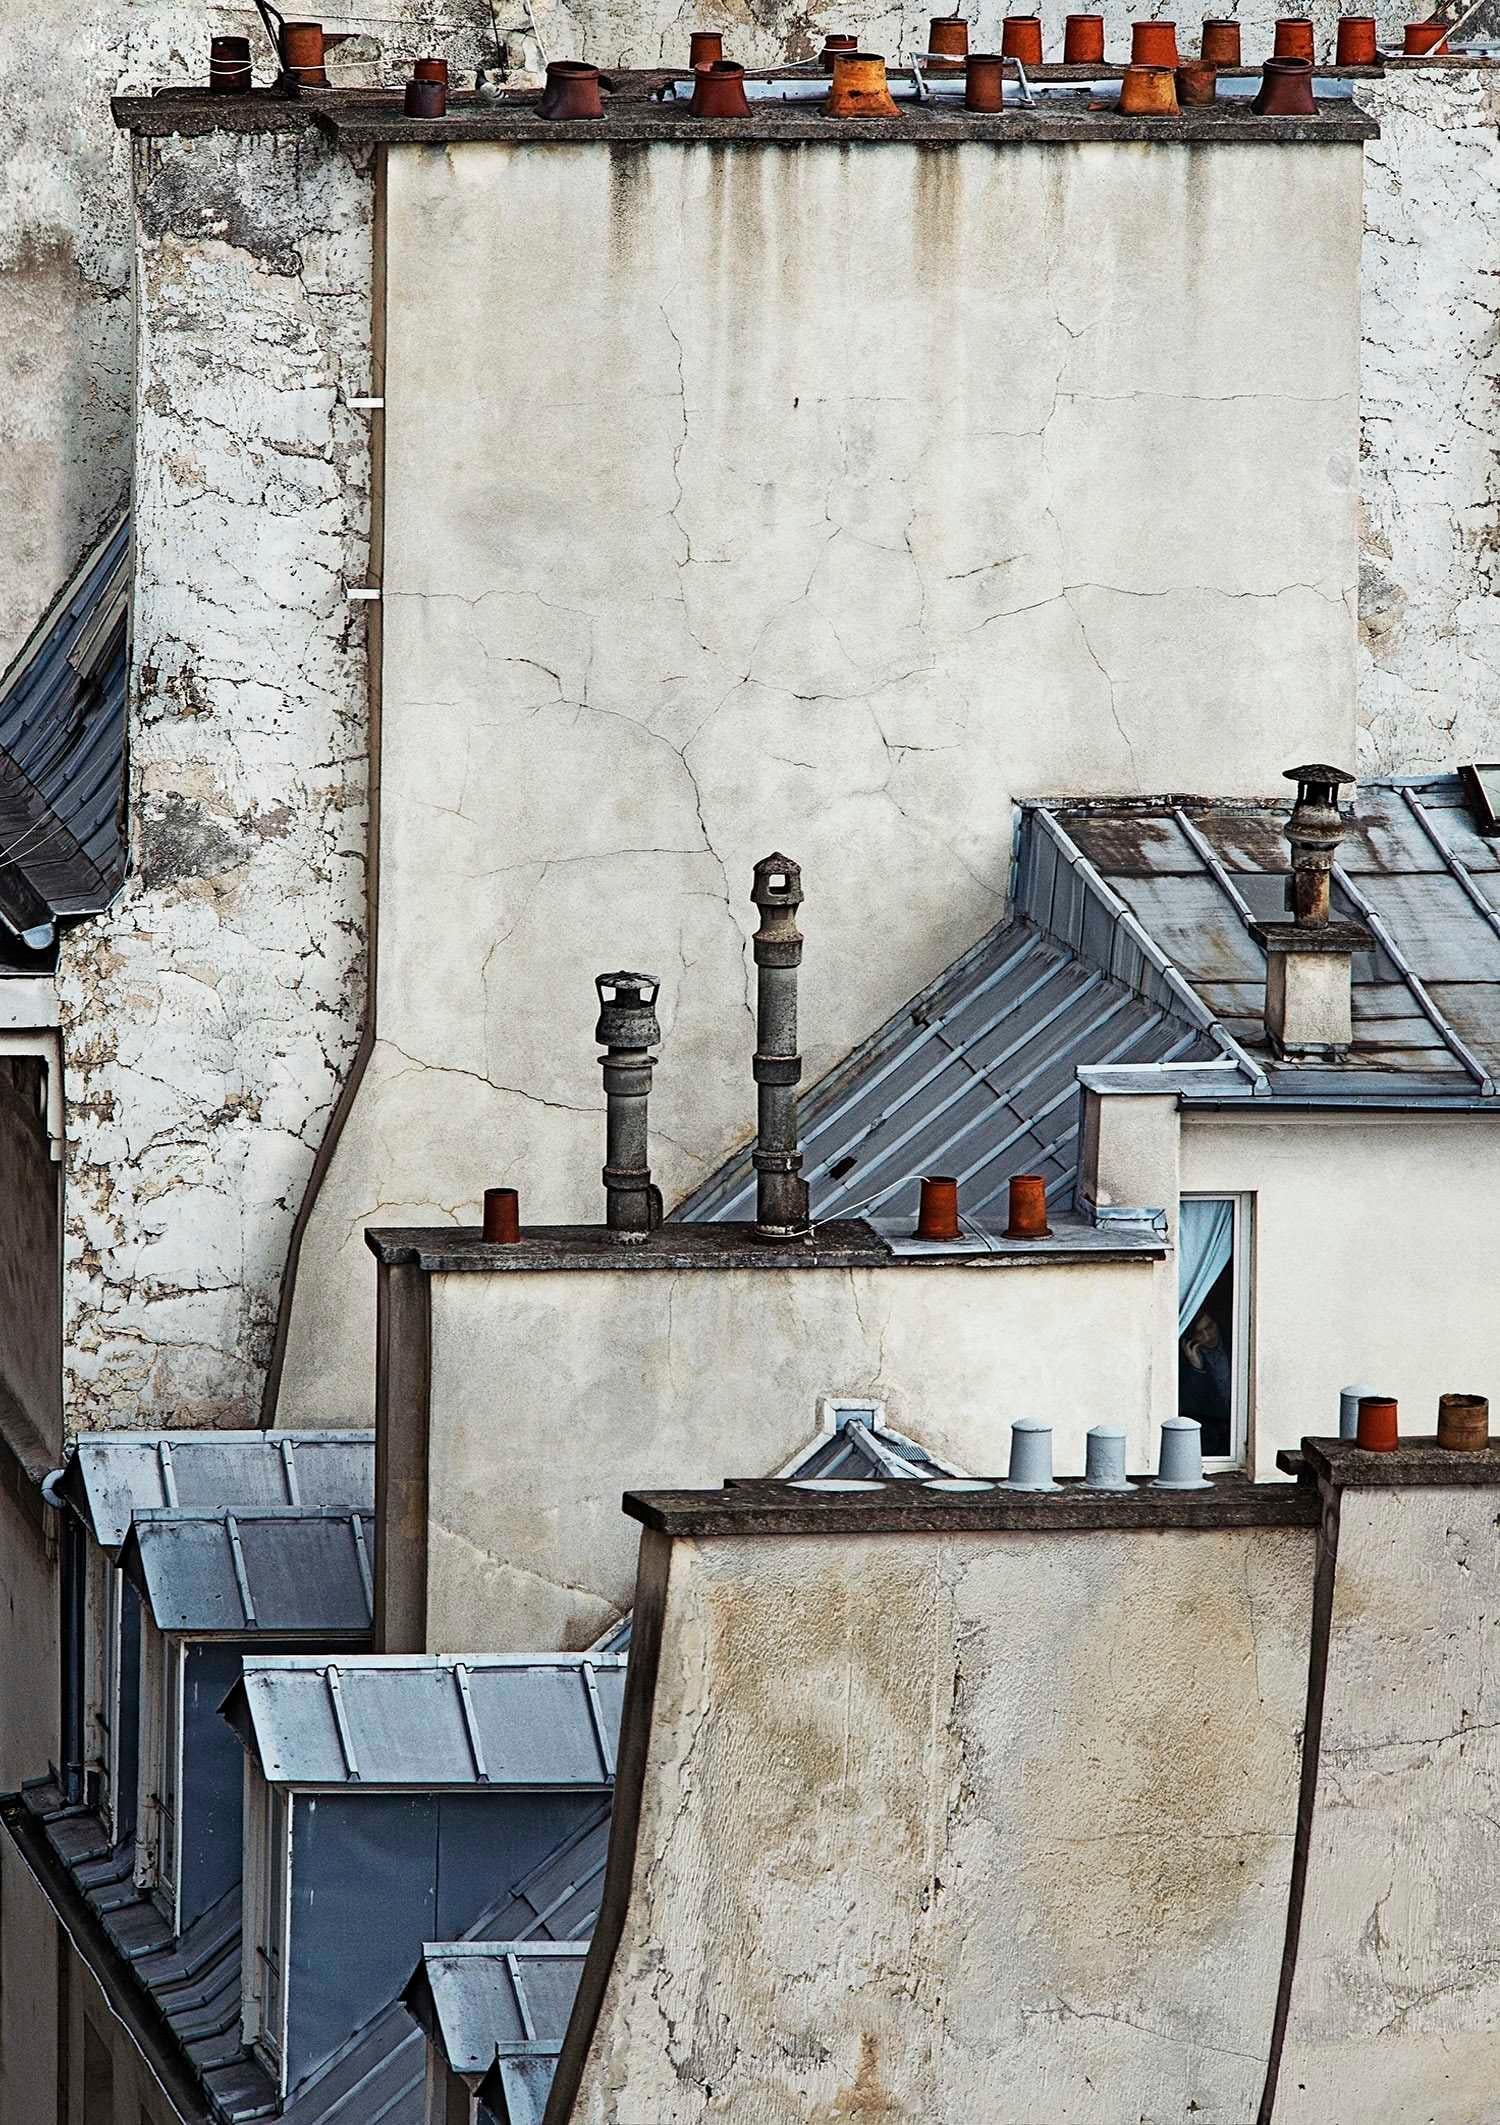 Michael WOLF (1954 – 2019, Germany)
Paris Rooftops 05, 2014
C–print
Sheet Sheet 172.7 x 121.9 cm (68 x 48 in.)
Edition of 9, plus 2 AP; Ed. no. 1/9

Michael Wolf was born in 1954 in Munich, Germany. He worked and lived in Paris and Hong Kong where